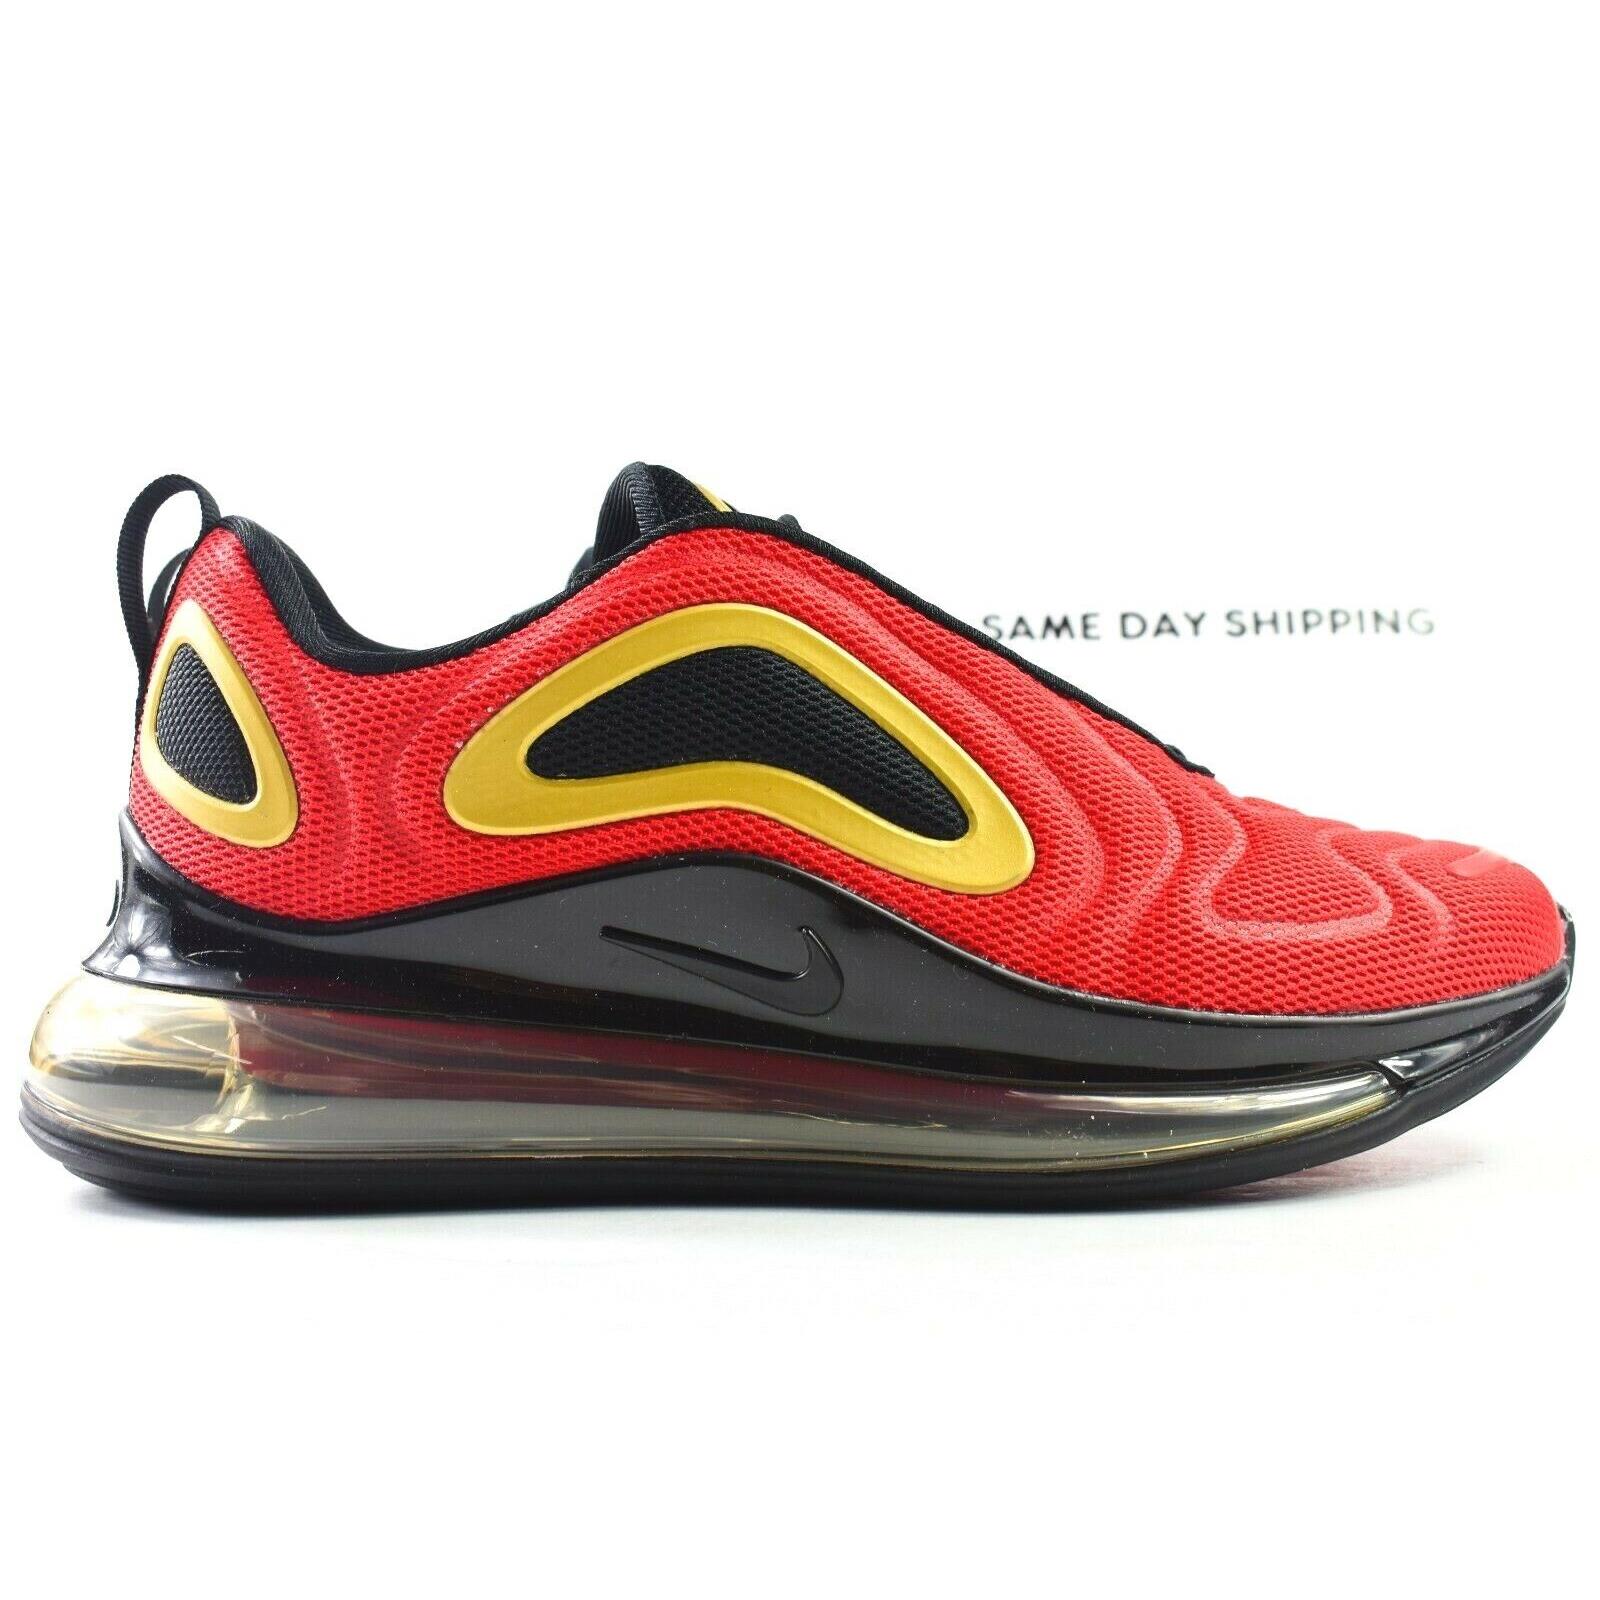 Nike Air Max 720 Womens Size 7 Shoes CU4871 600 Black Gold University Red